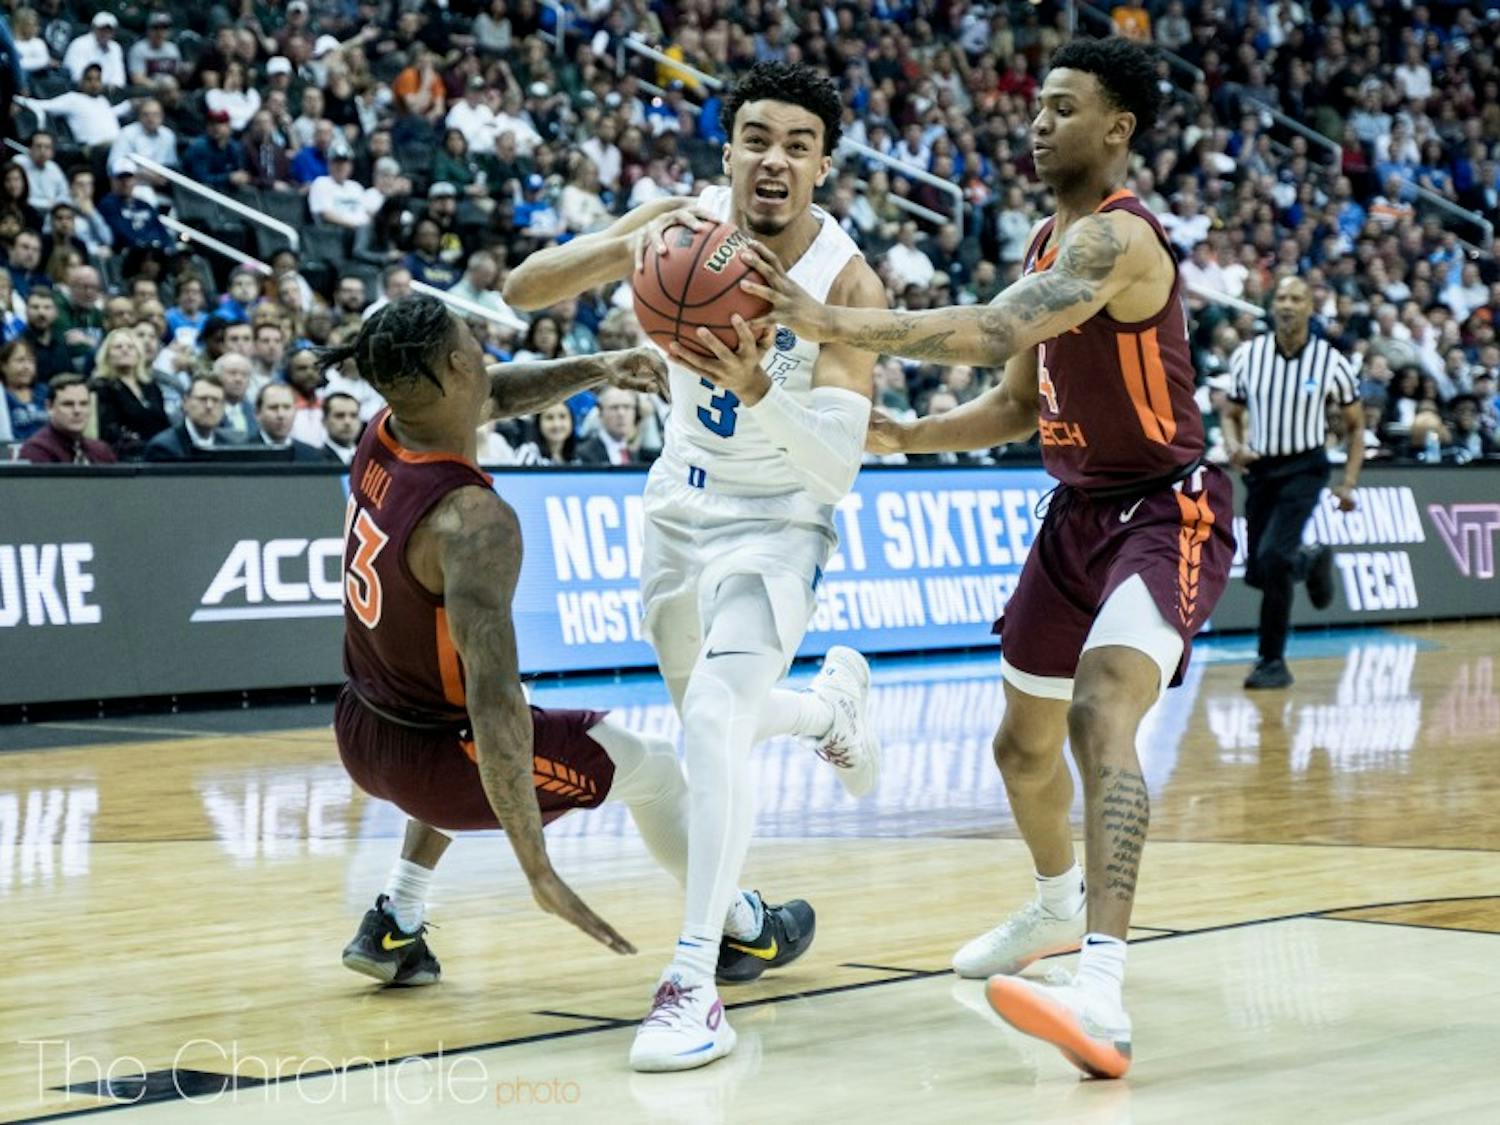 Tre Jones, like his brother before him, is playing his best basketball in March, setting a career high in points and 3-pointers Friday night against Virginia Tech.